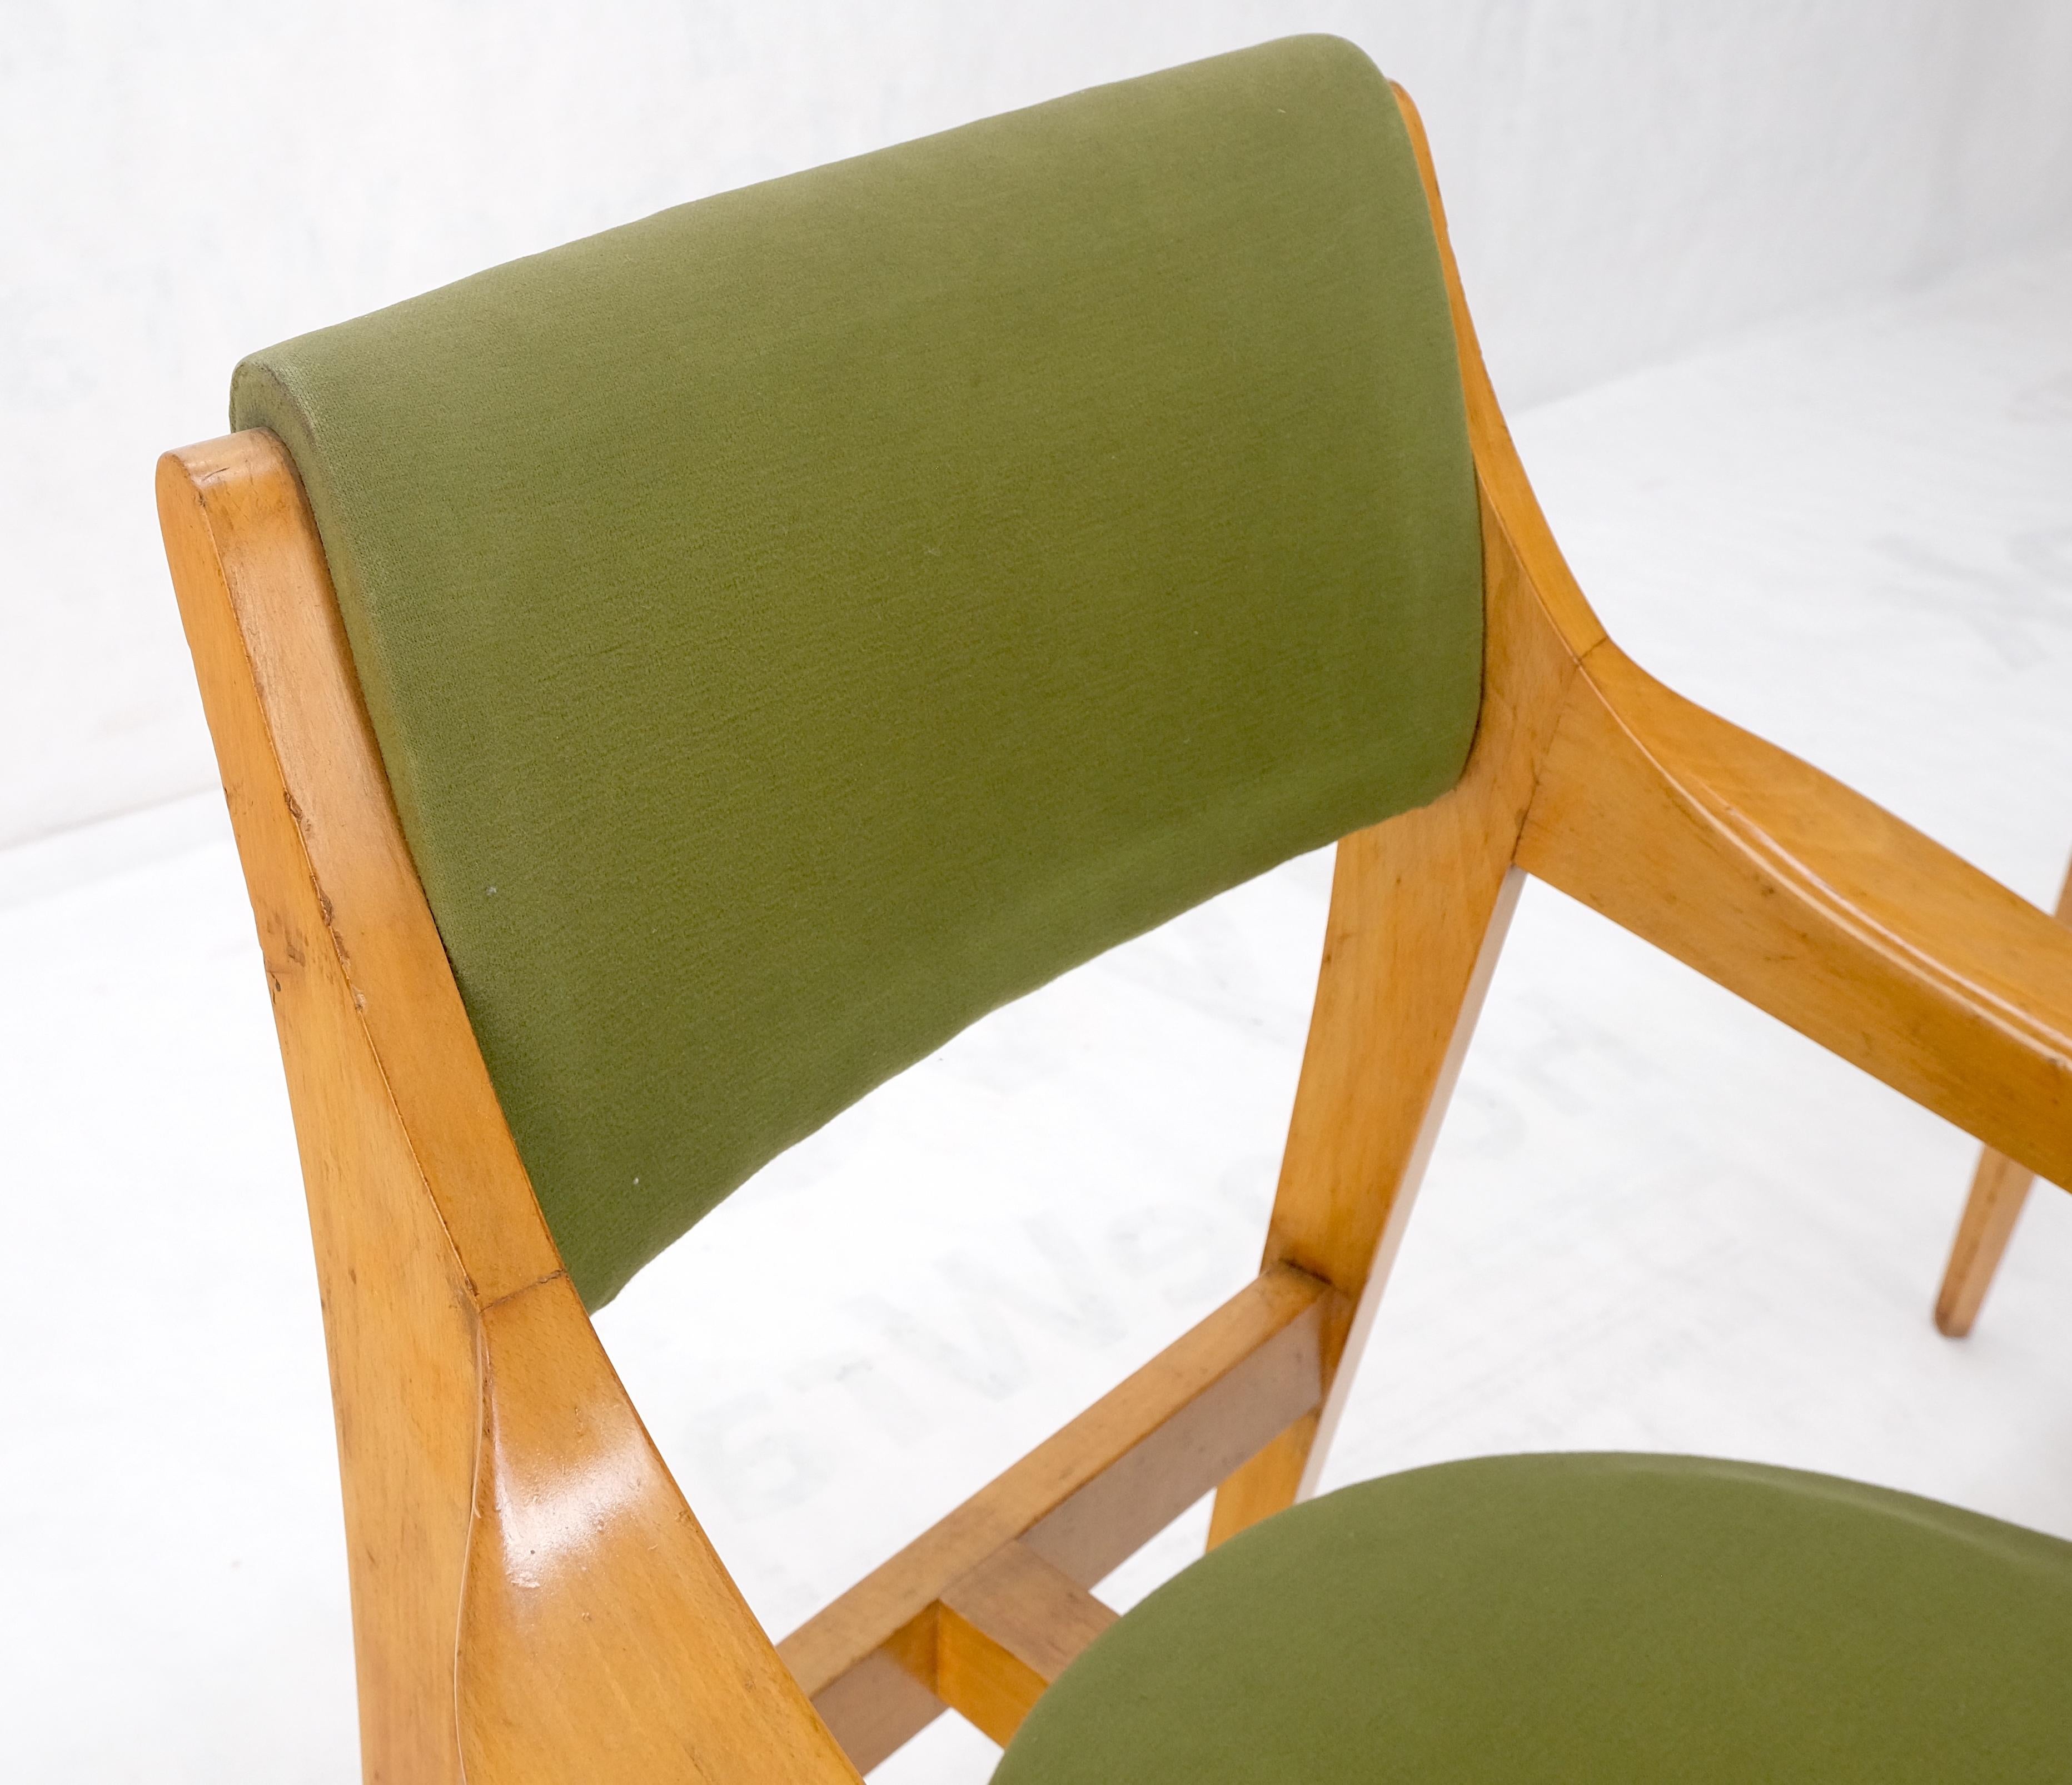 Pair of c1950s Blond Birch Scandinavian Swedish Arm Chairs Green Upholstery For Sale 3